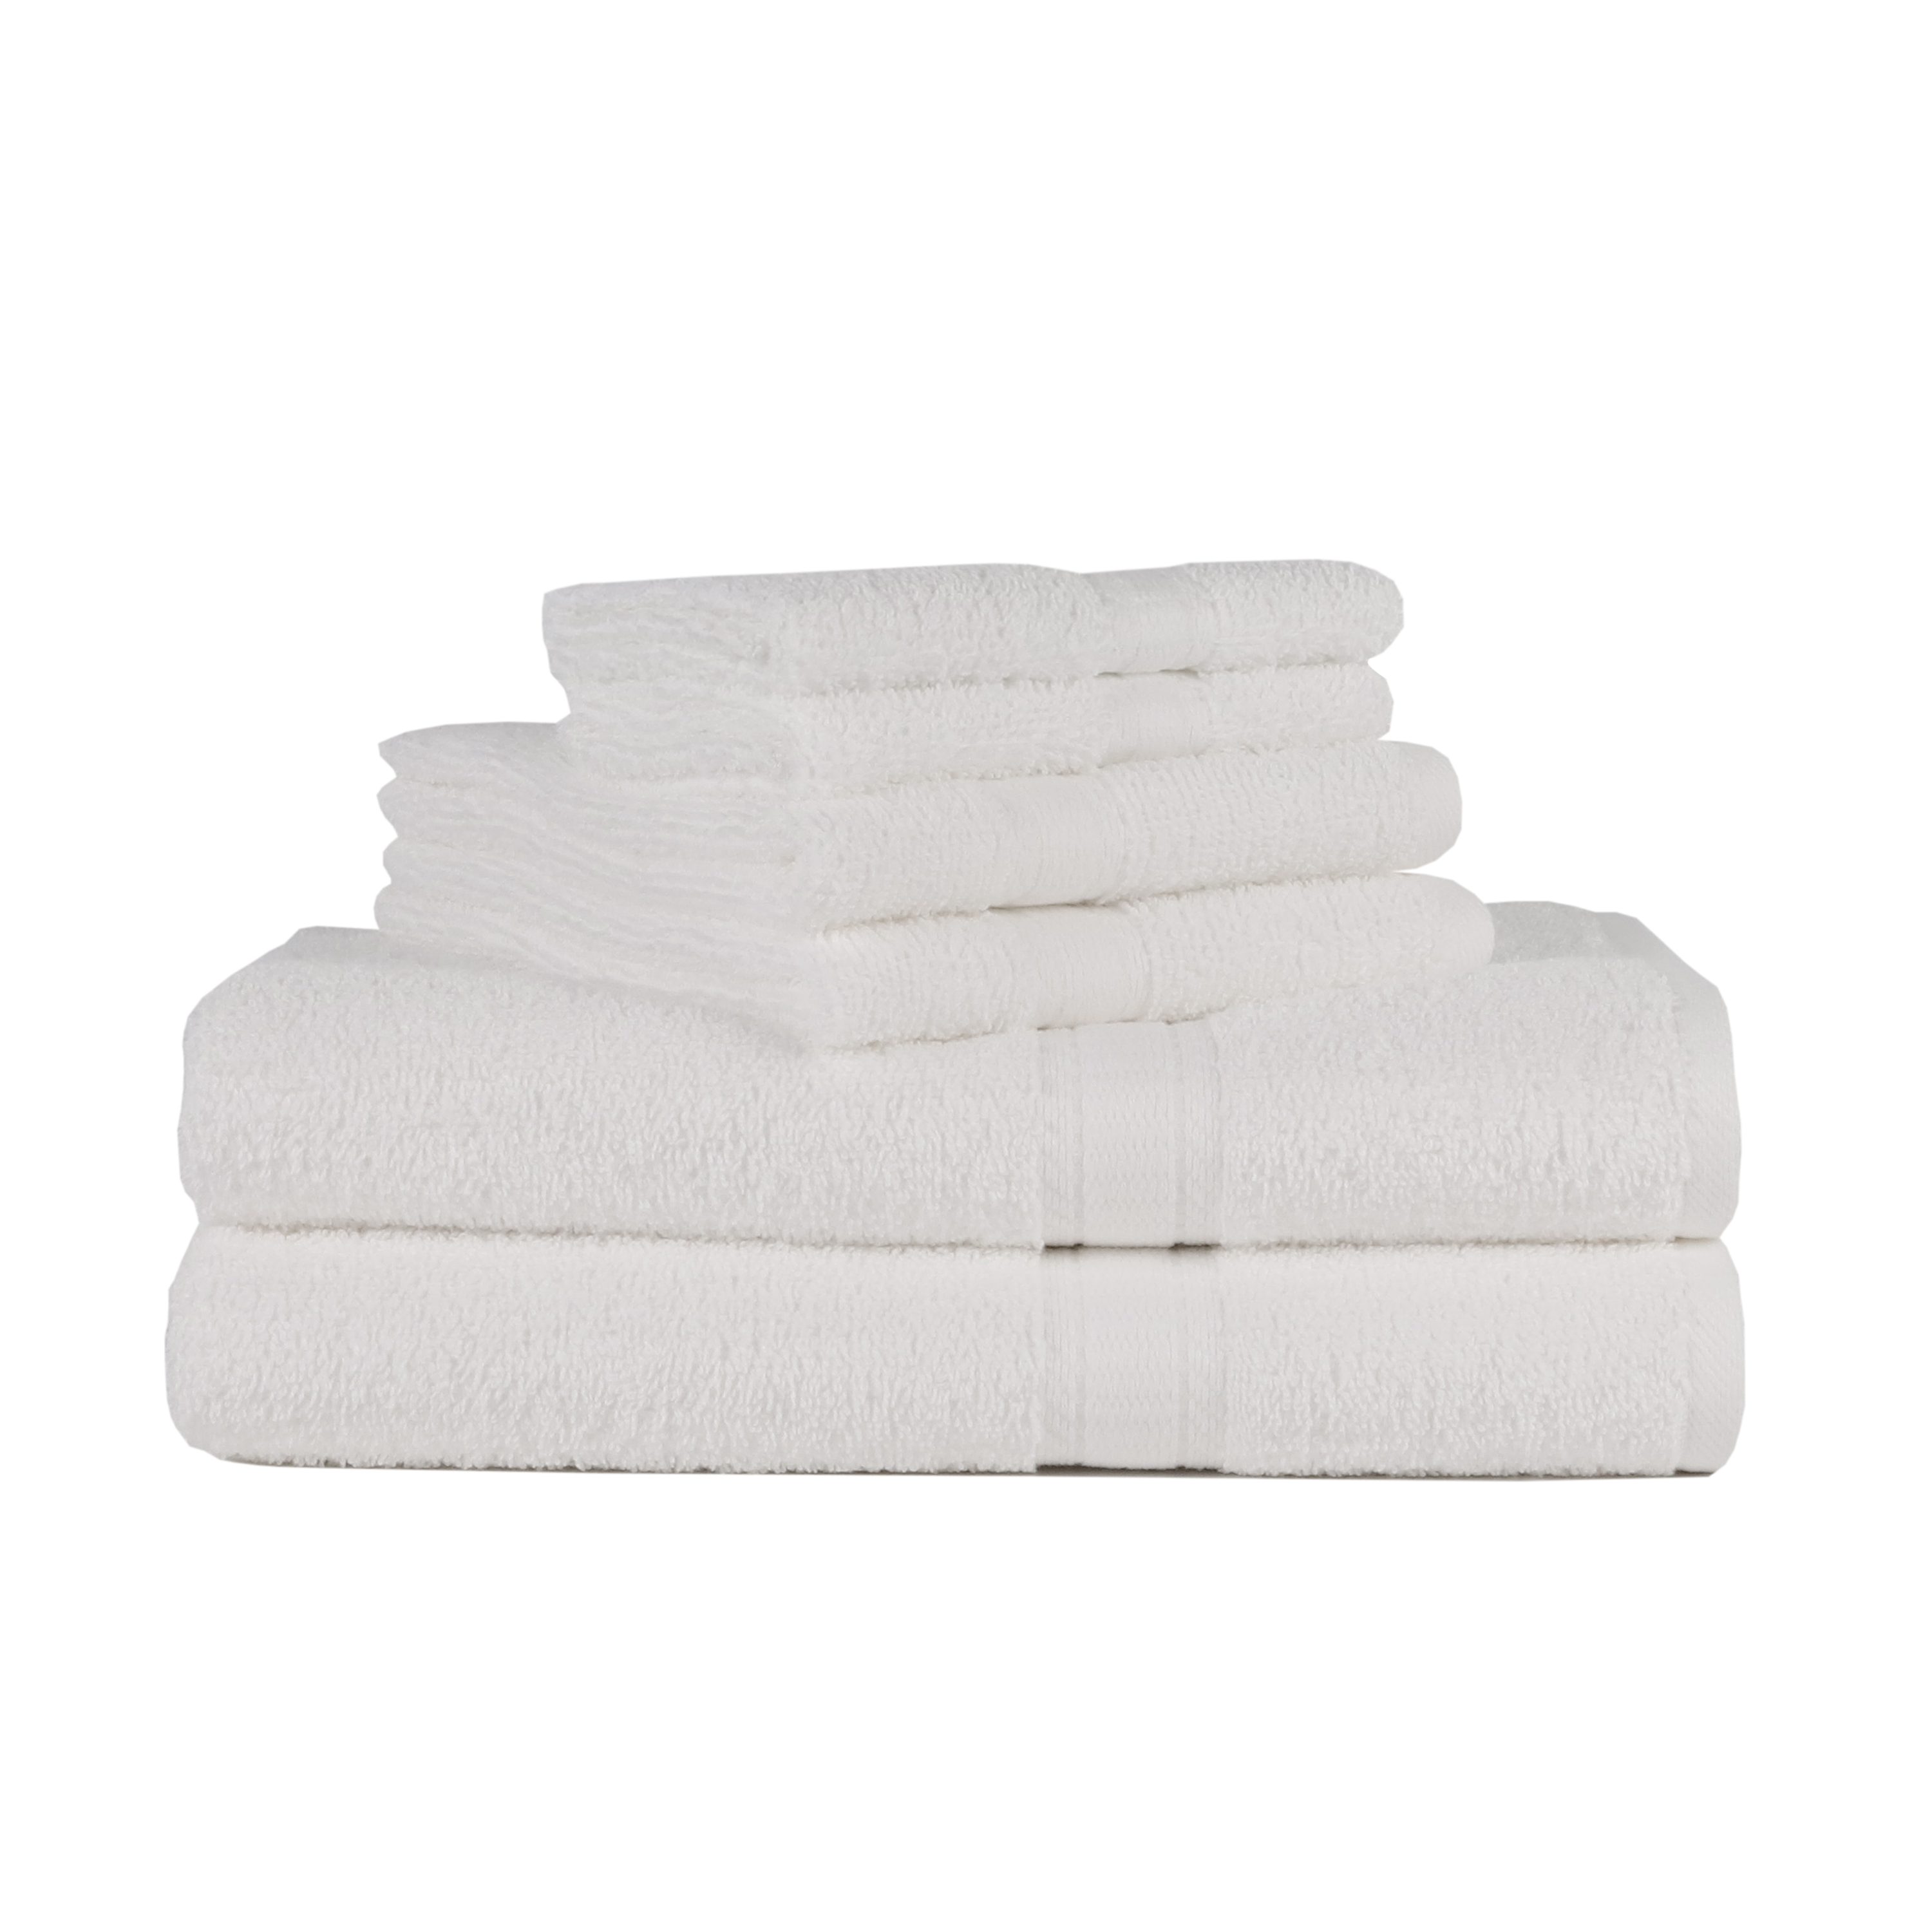 Mainstays Solid Adult 6-Piece Bath Towel Set, White - image 1 of 10